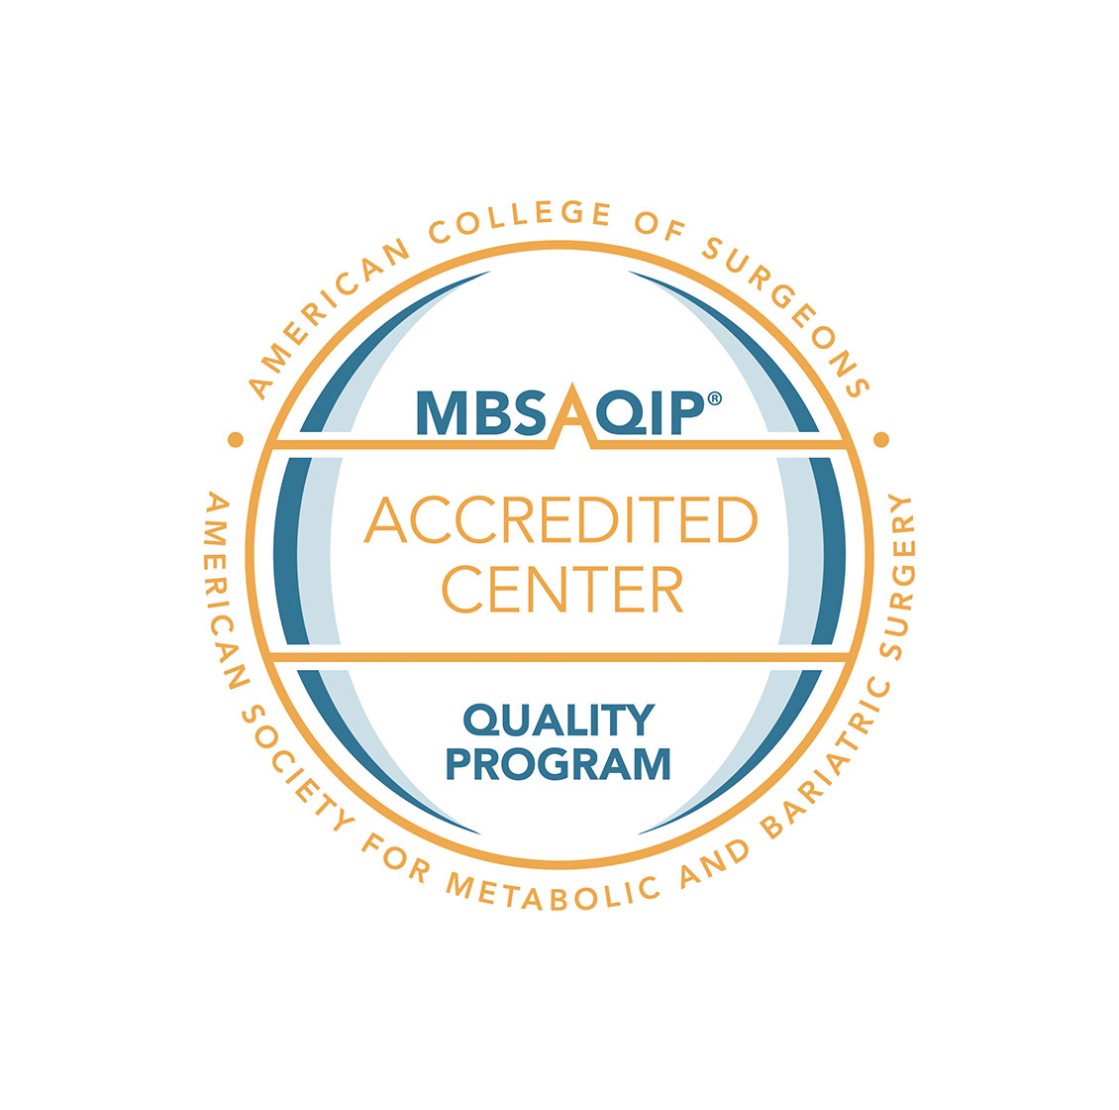 Comprehensive Center accreditation from the Metabolic and Bariatric Surgery Accreditation and Quality Improvement Program (MBSAQIP)